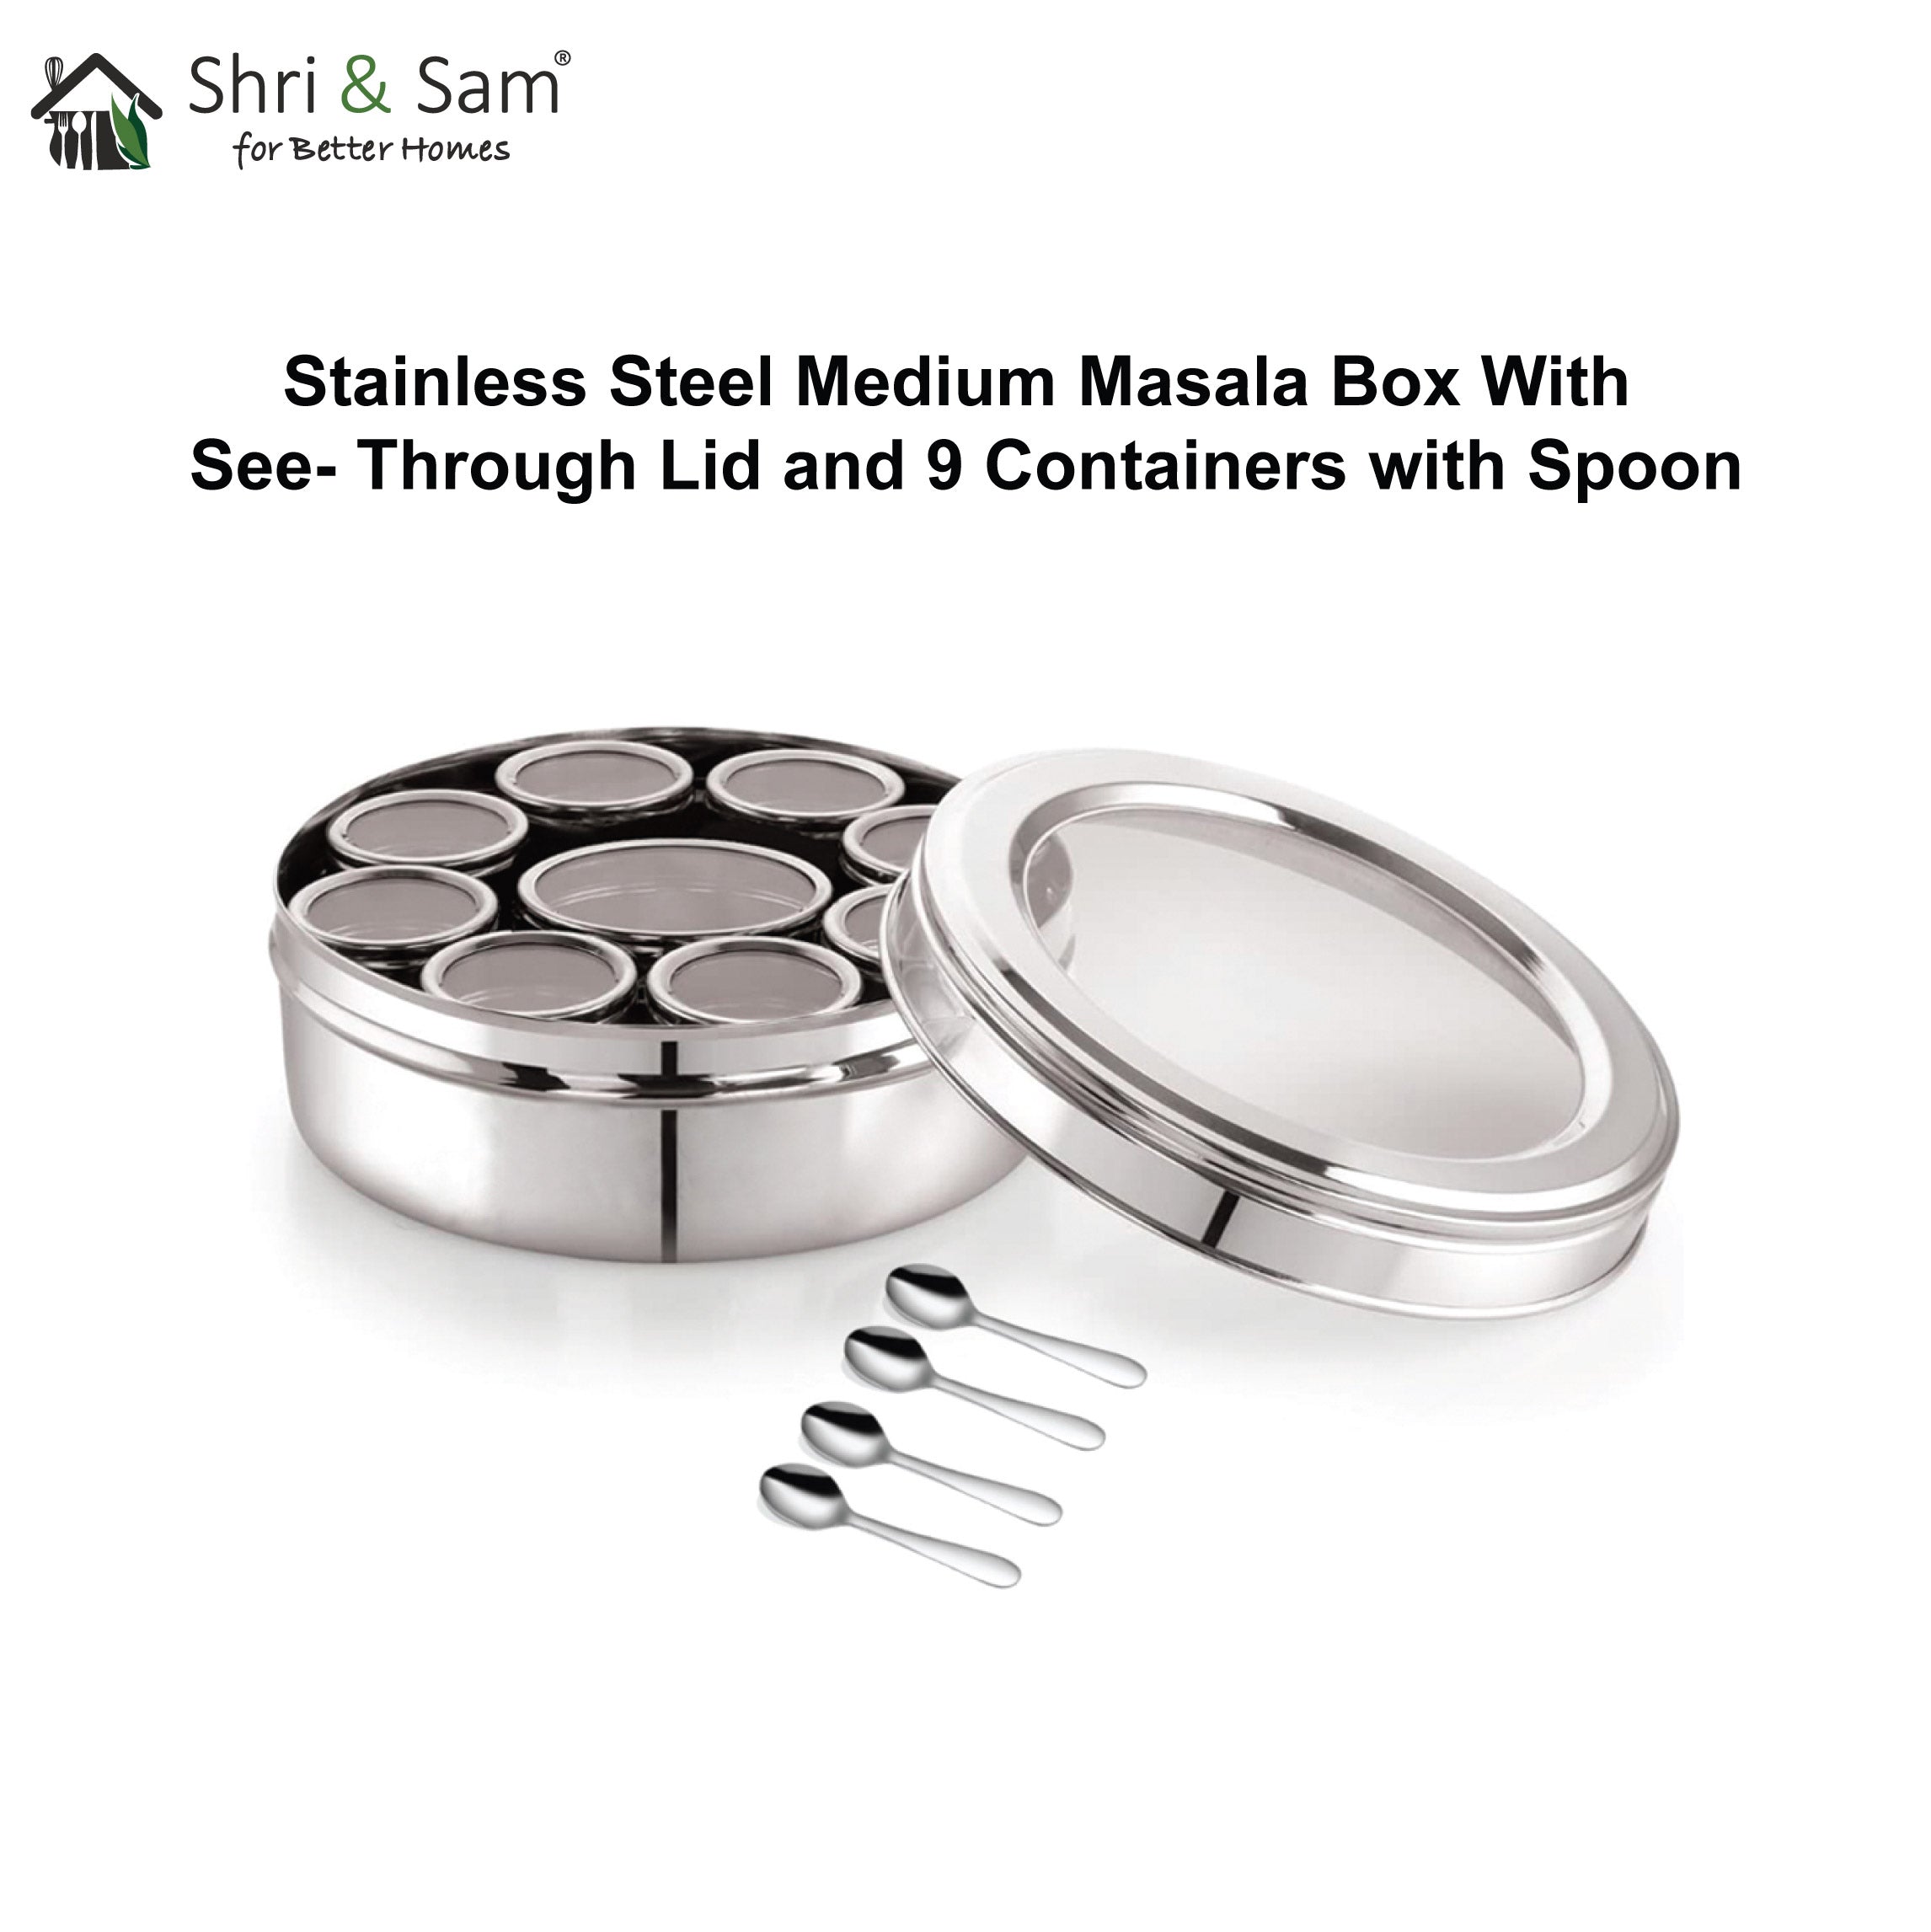 Stainless Steel Medium Masala Box with See Through Lid and 9 Containers with Spoon